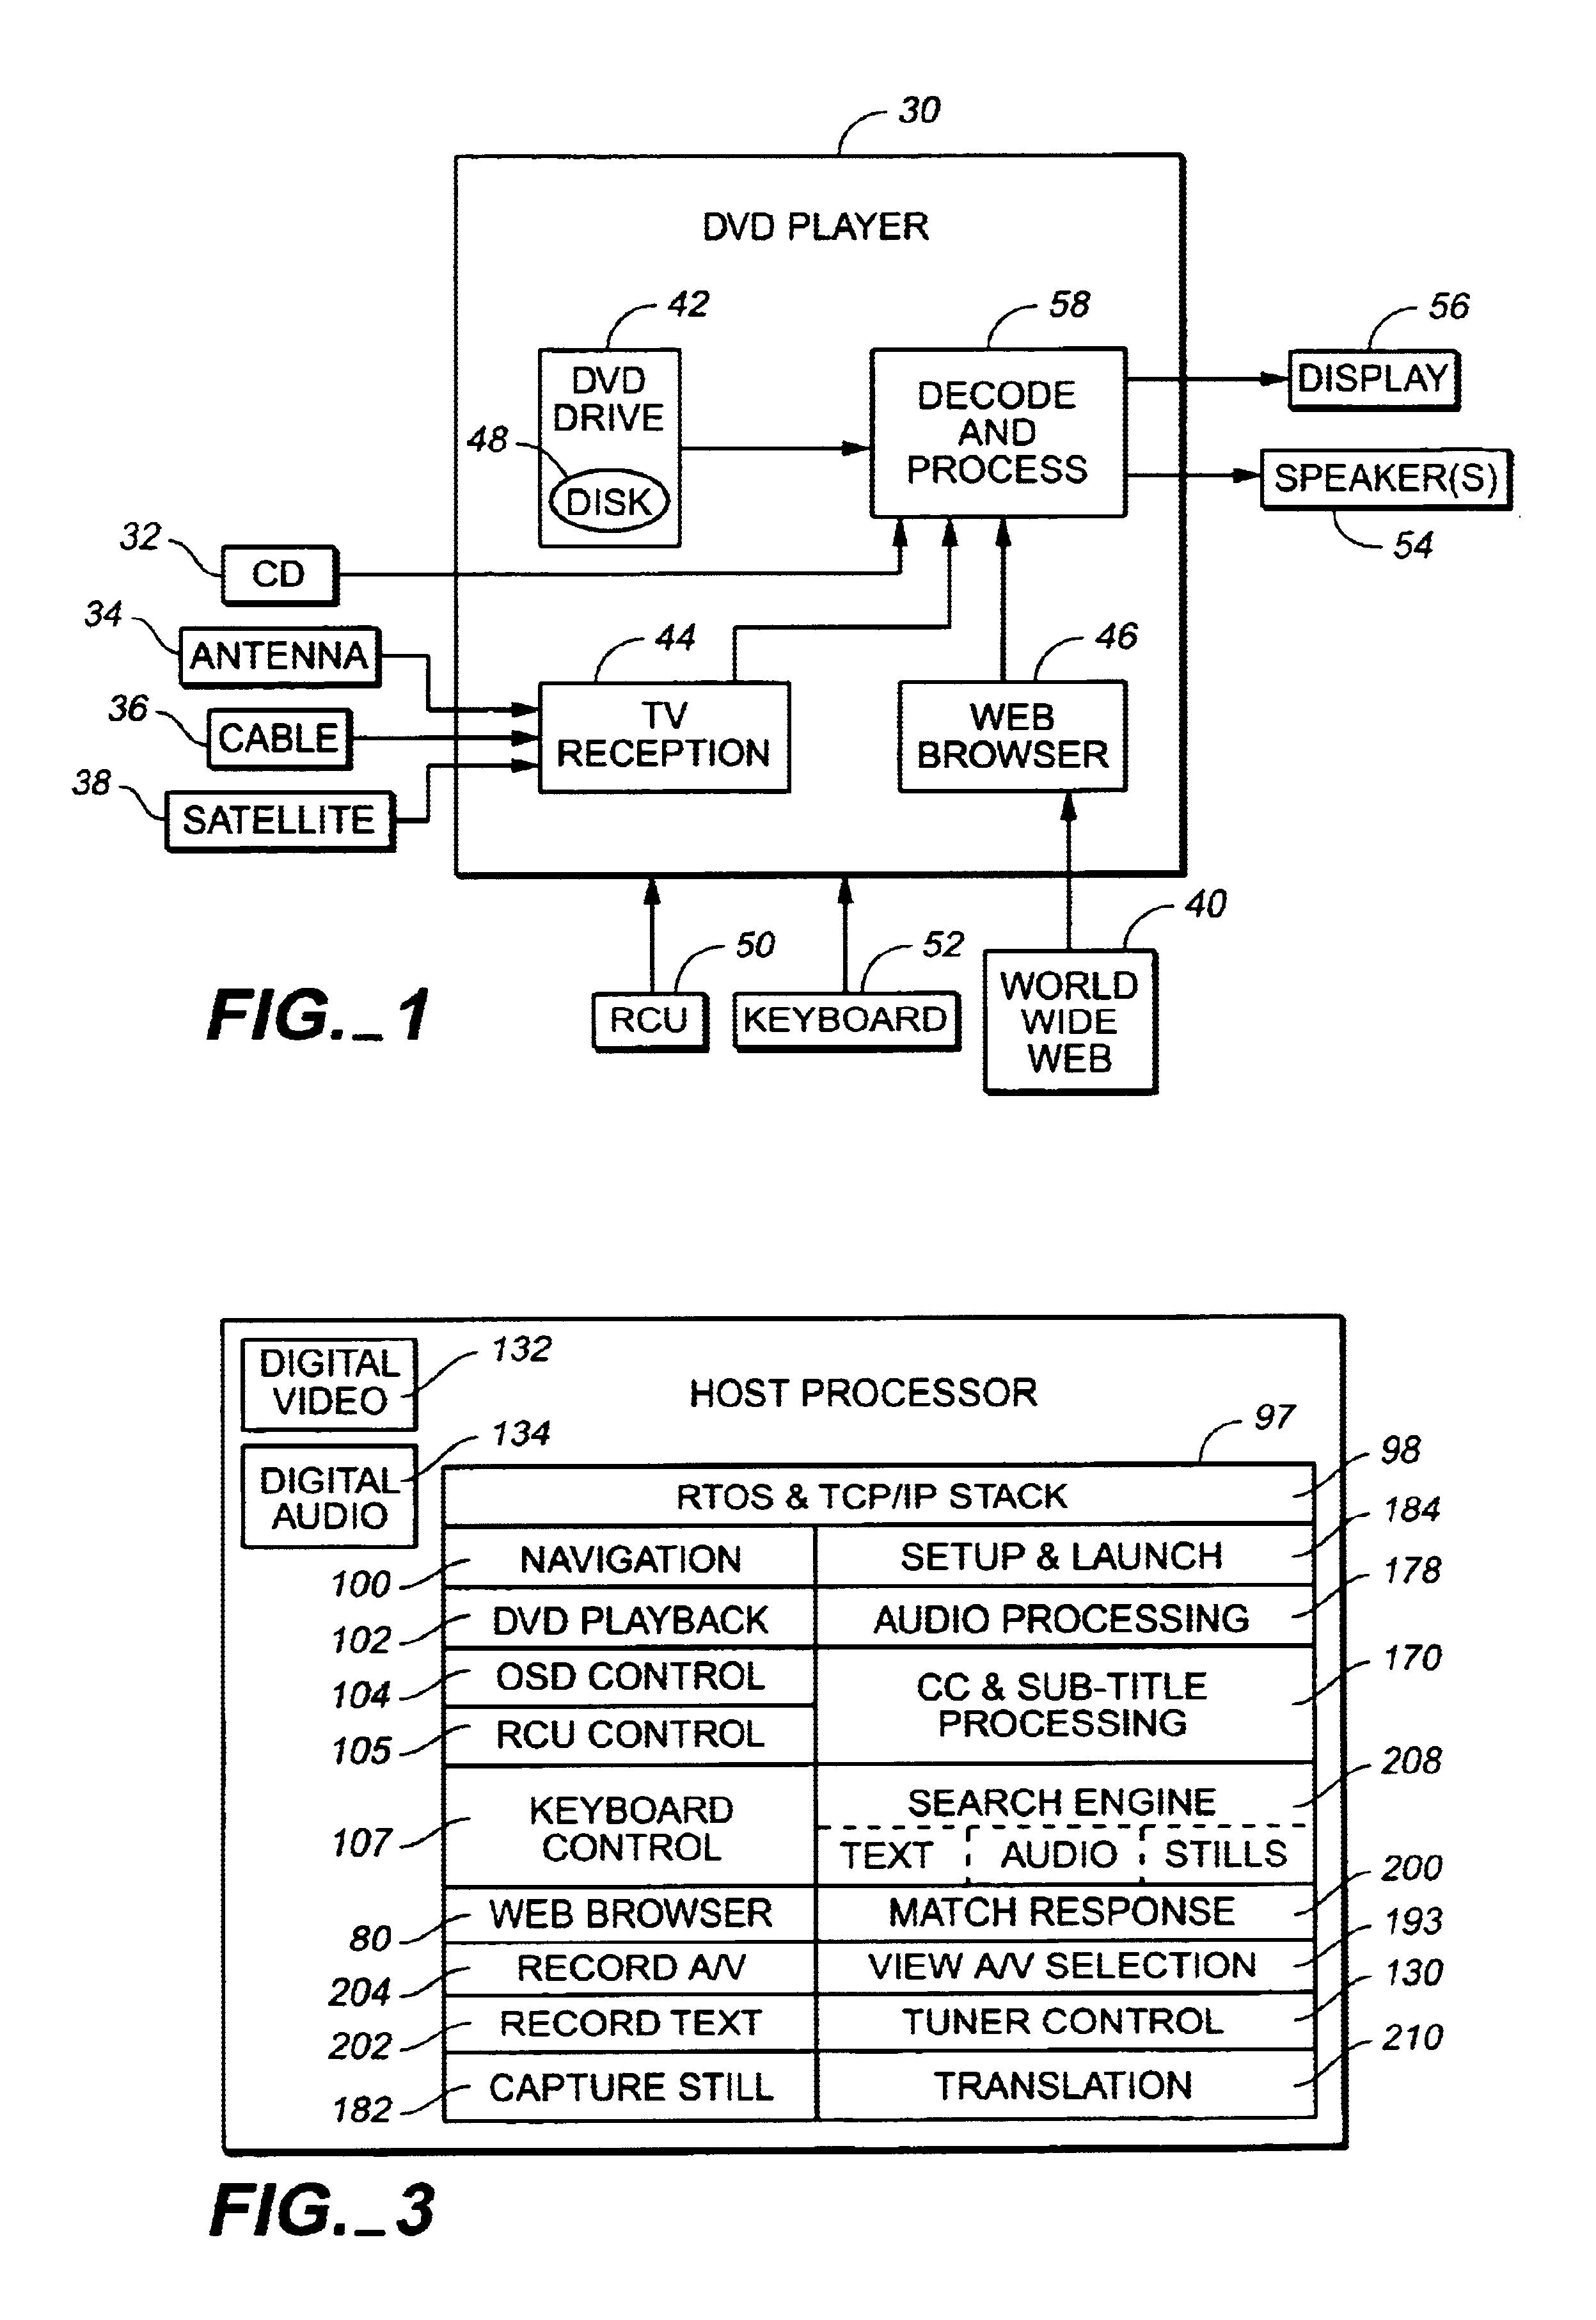 Audio/visual device for capturing, searching and/or displaying audio/visual material